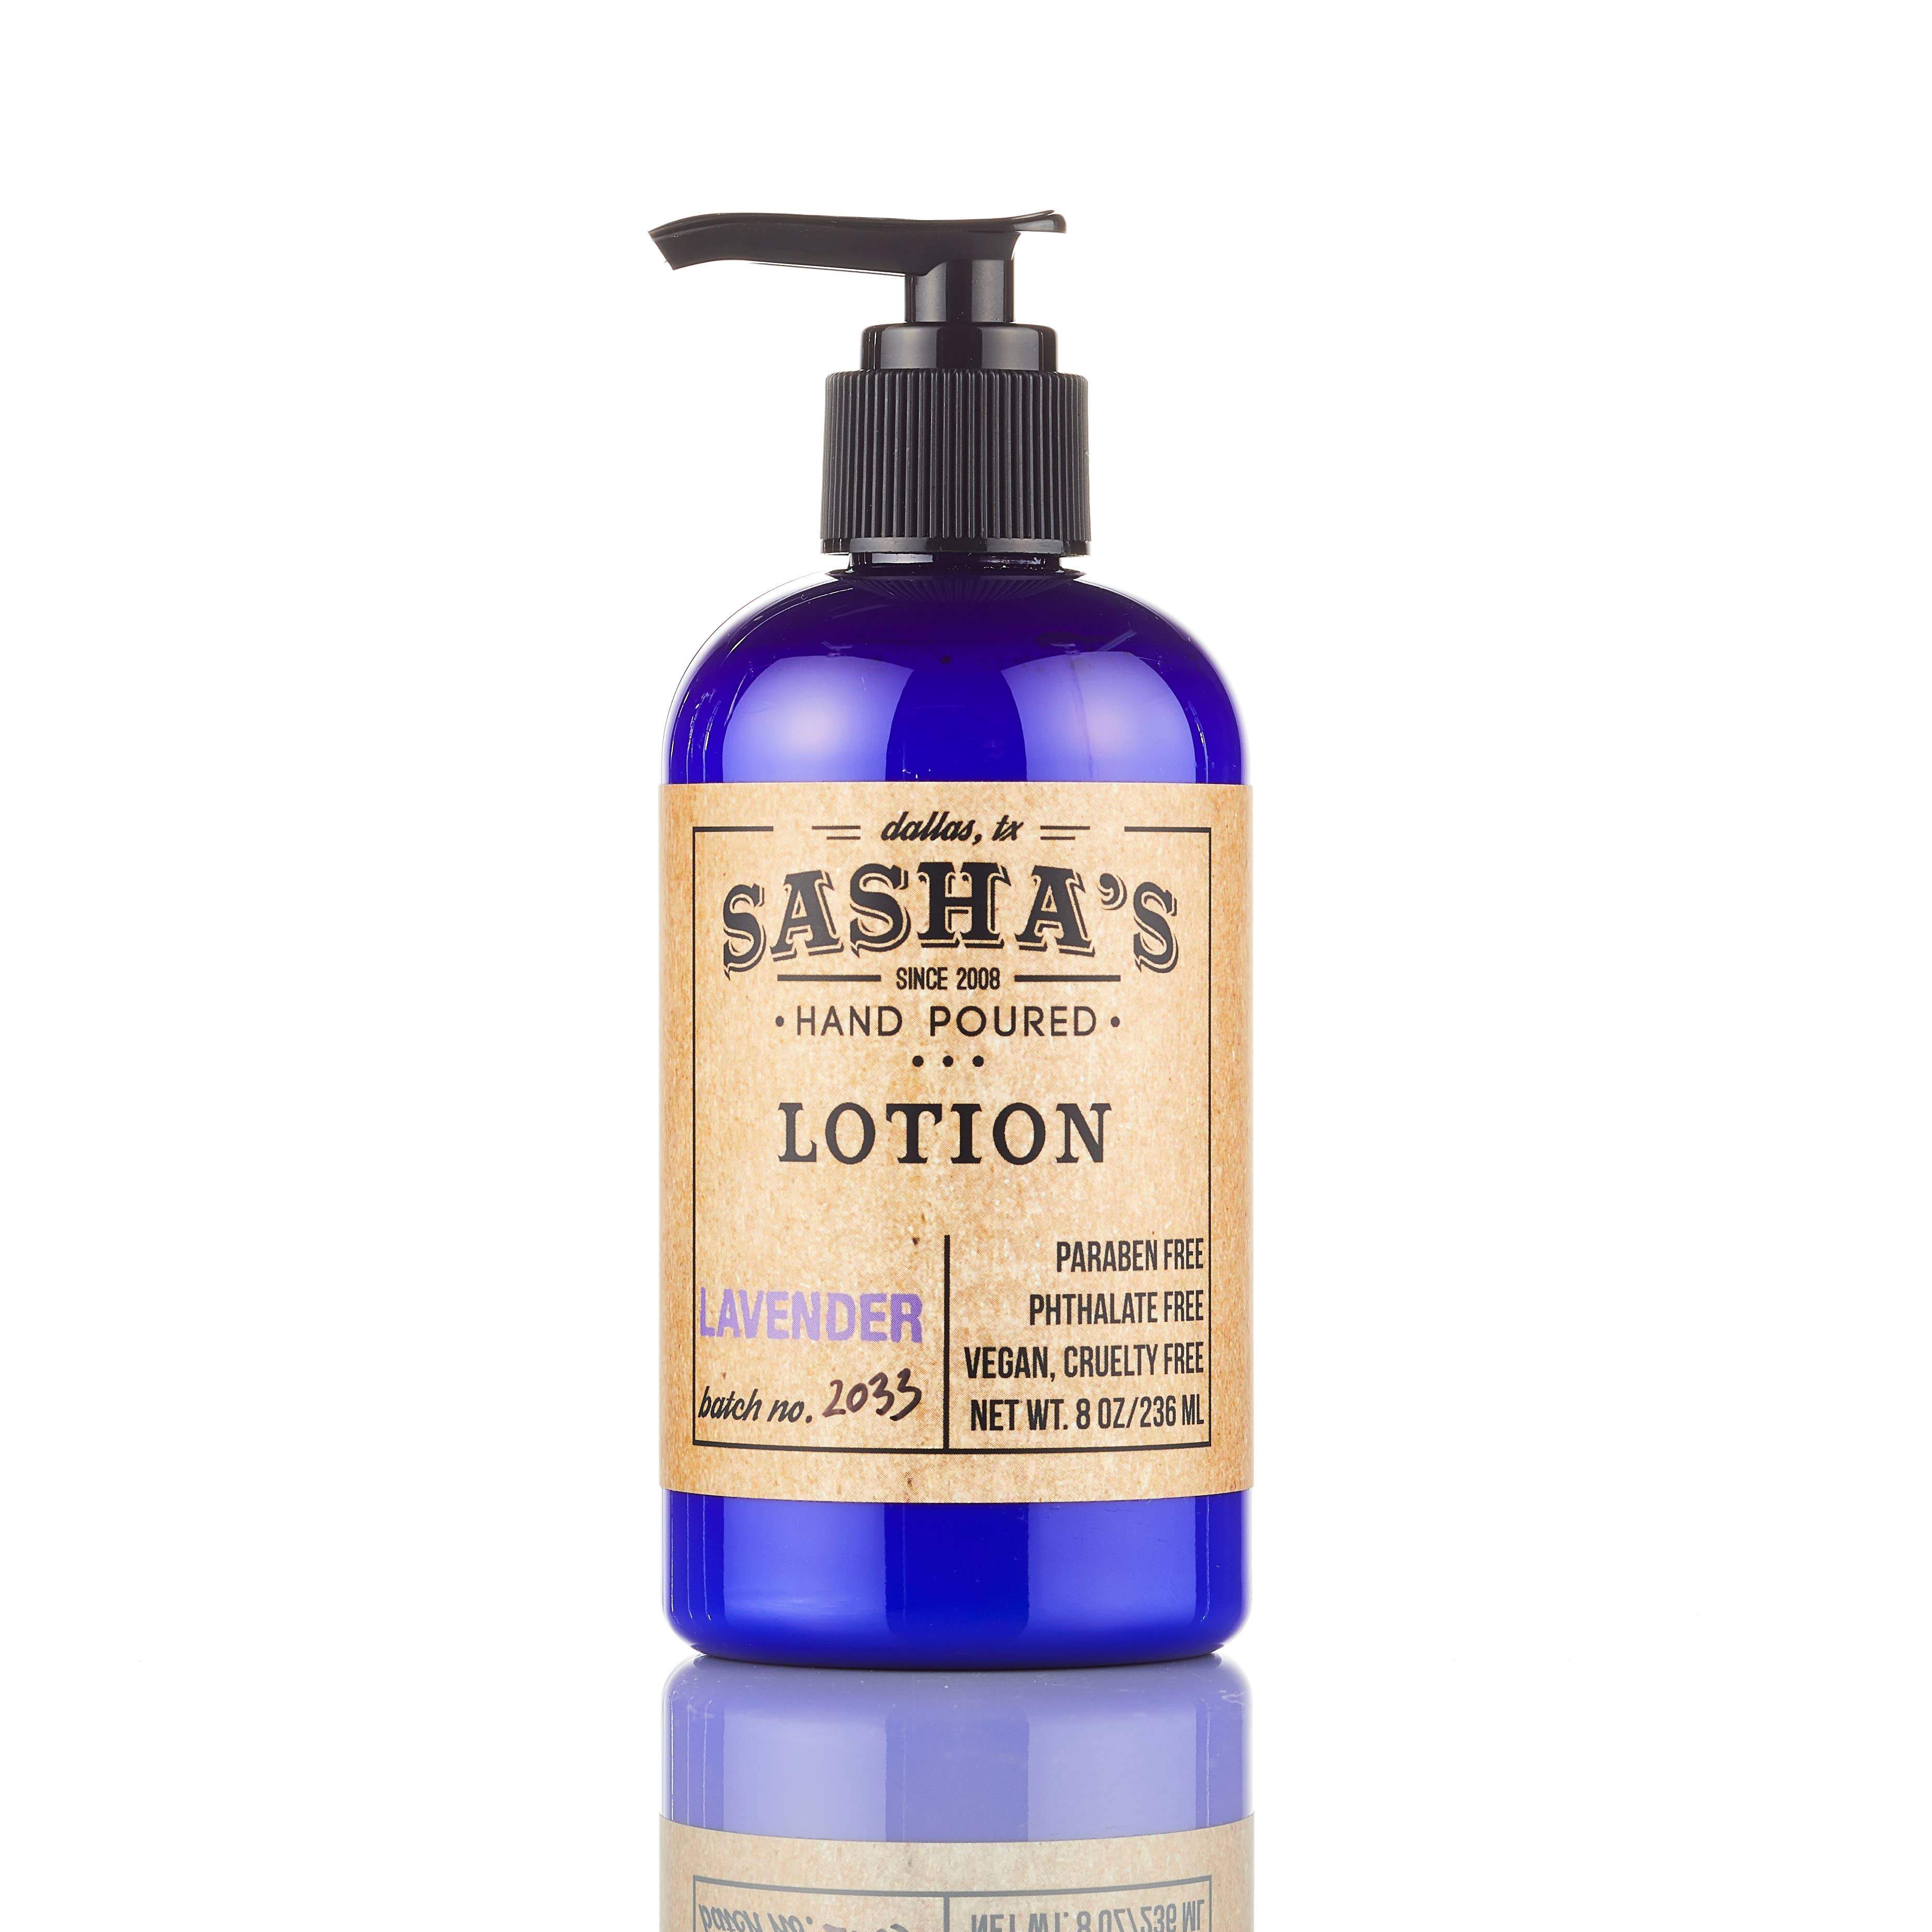 Sasha's Hand Poured Bath and Body - Lotion Best Sellers